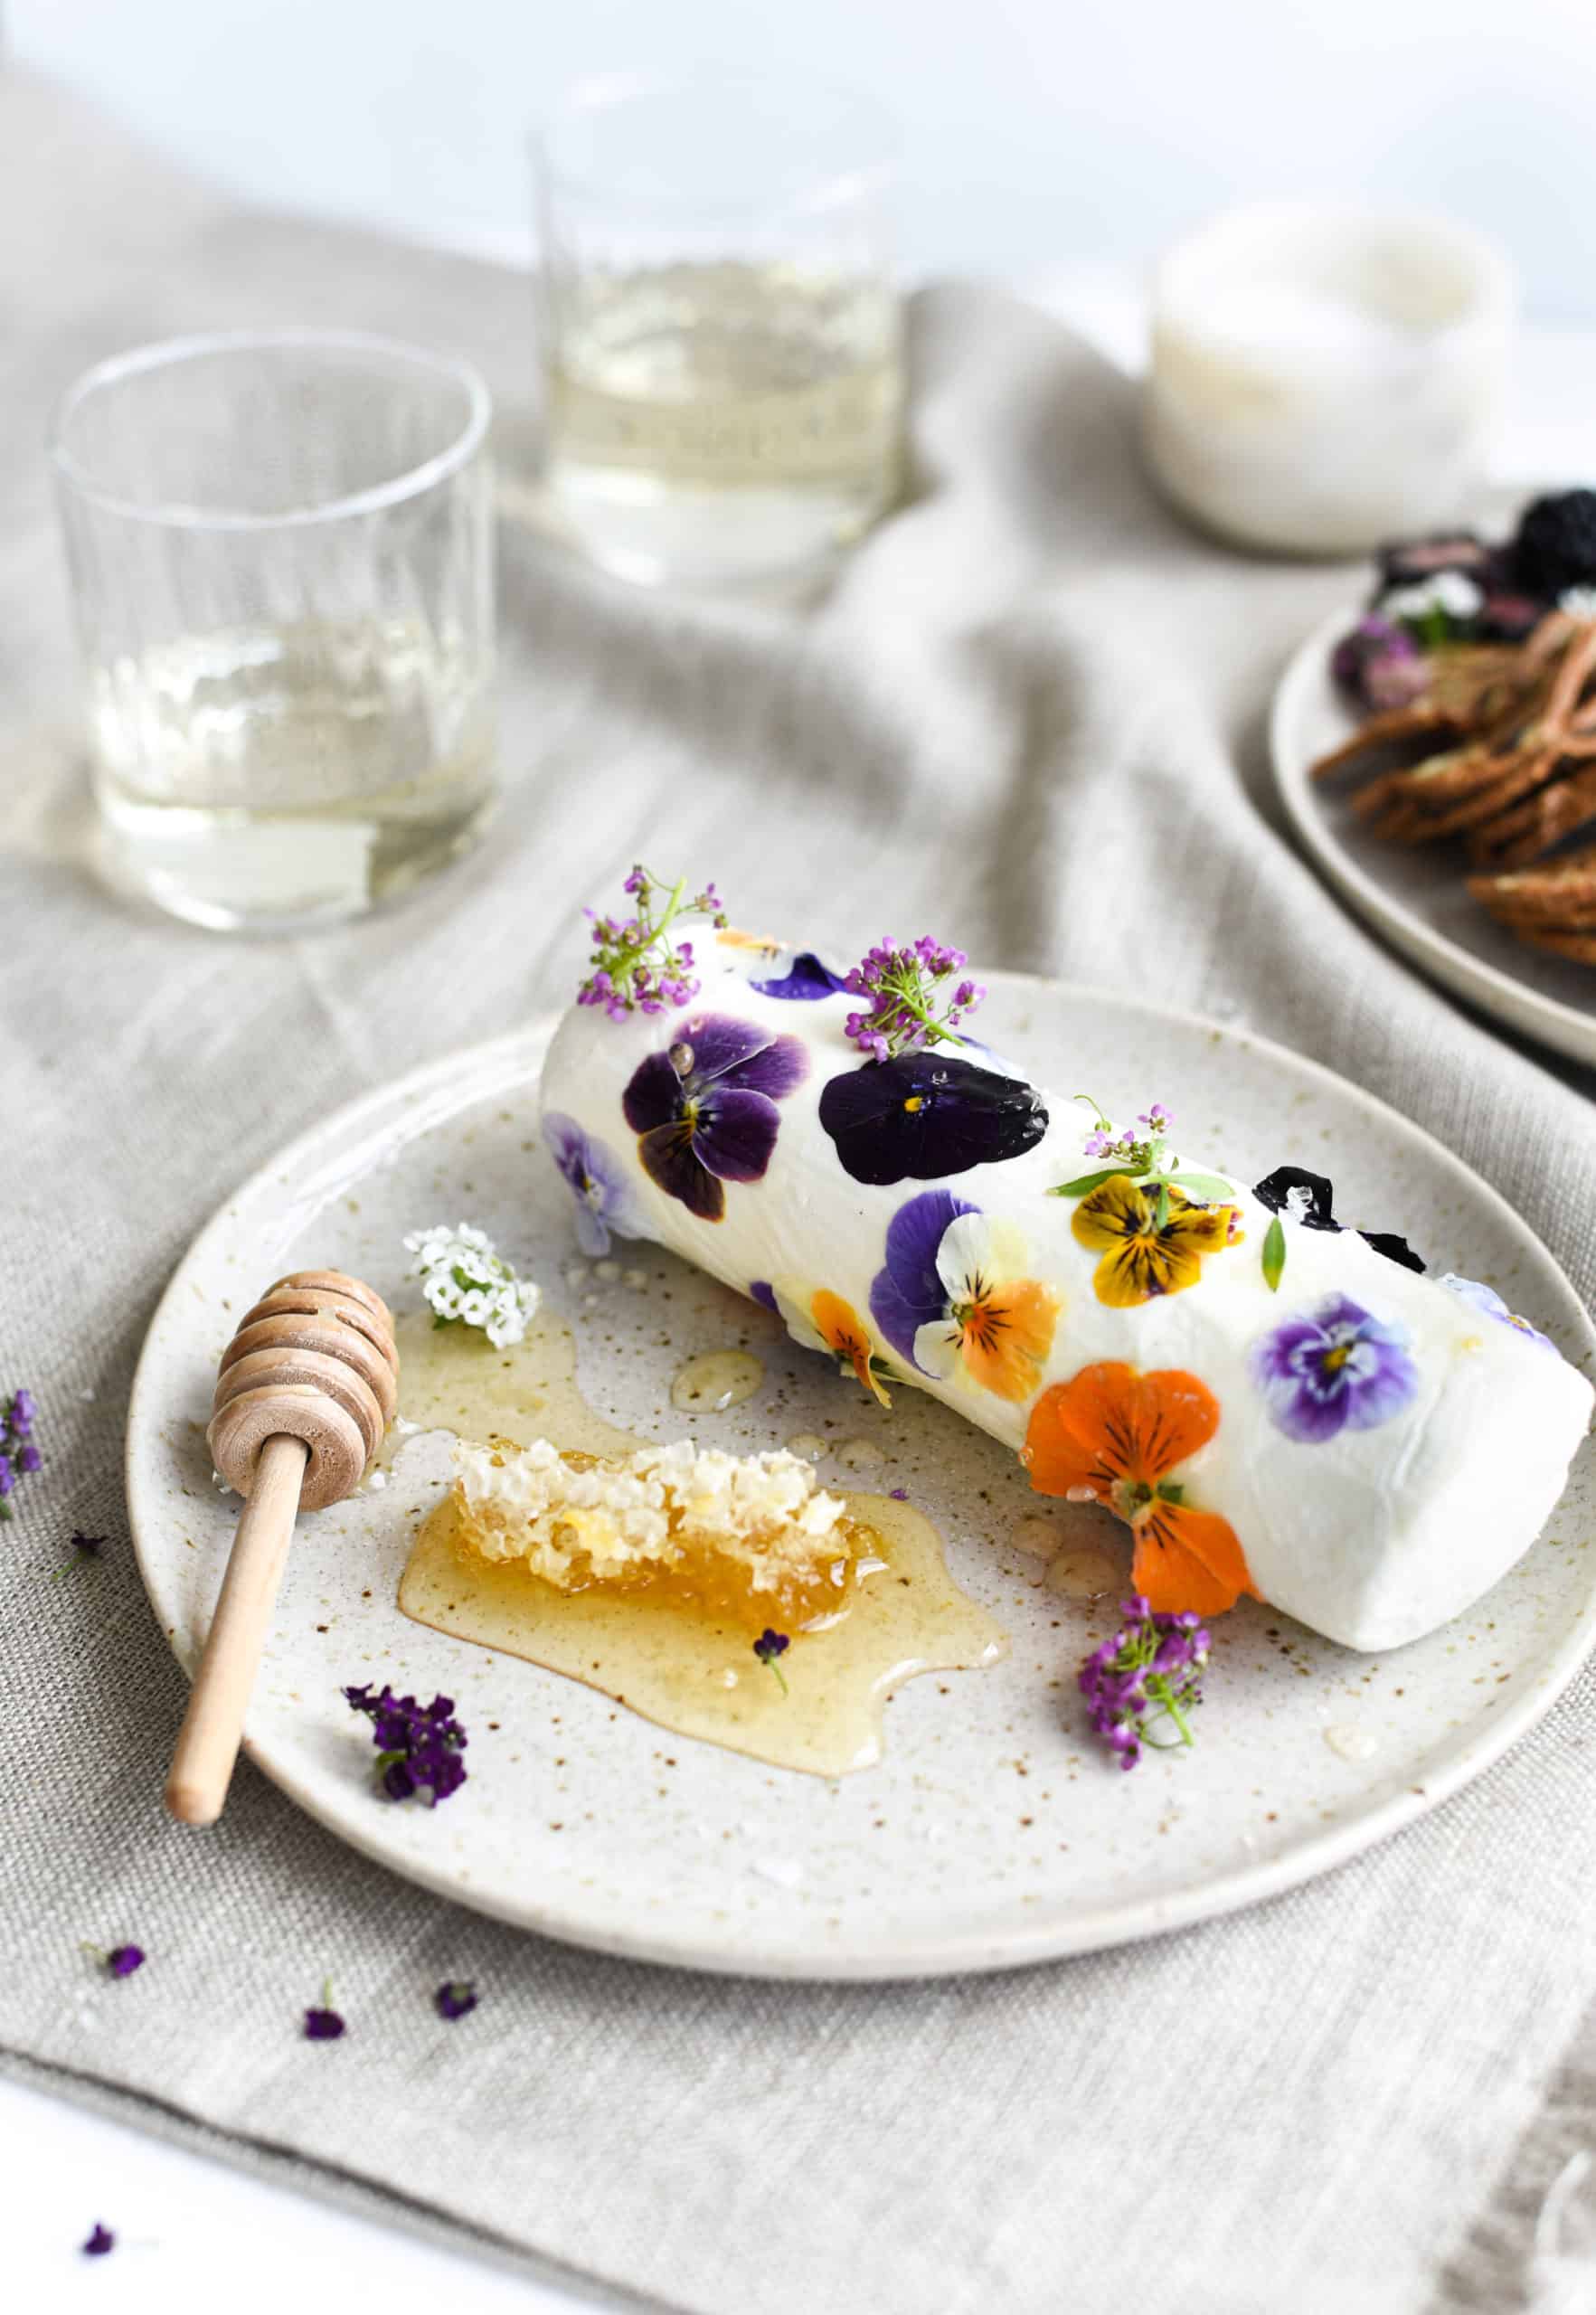 Goat Cheese with Edible Flowers and Honey - Goodtaste with Tanji